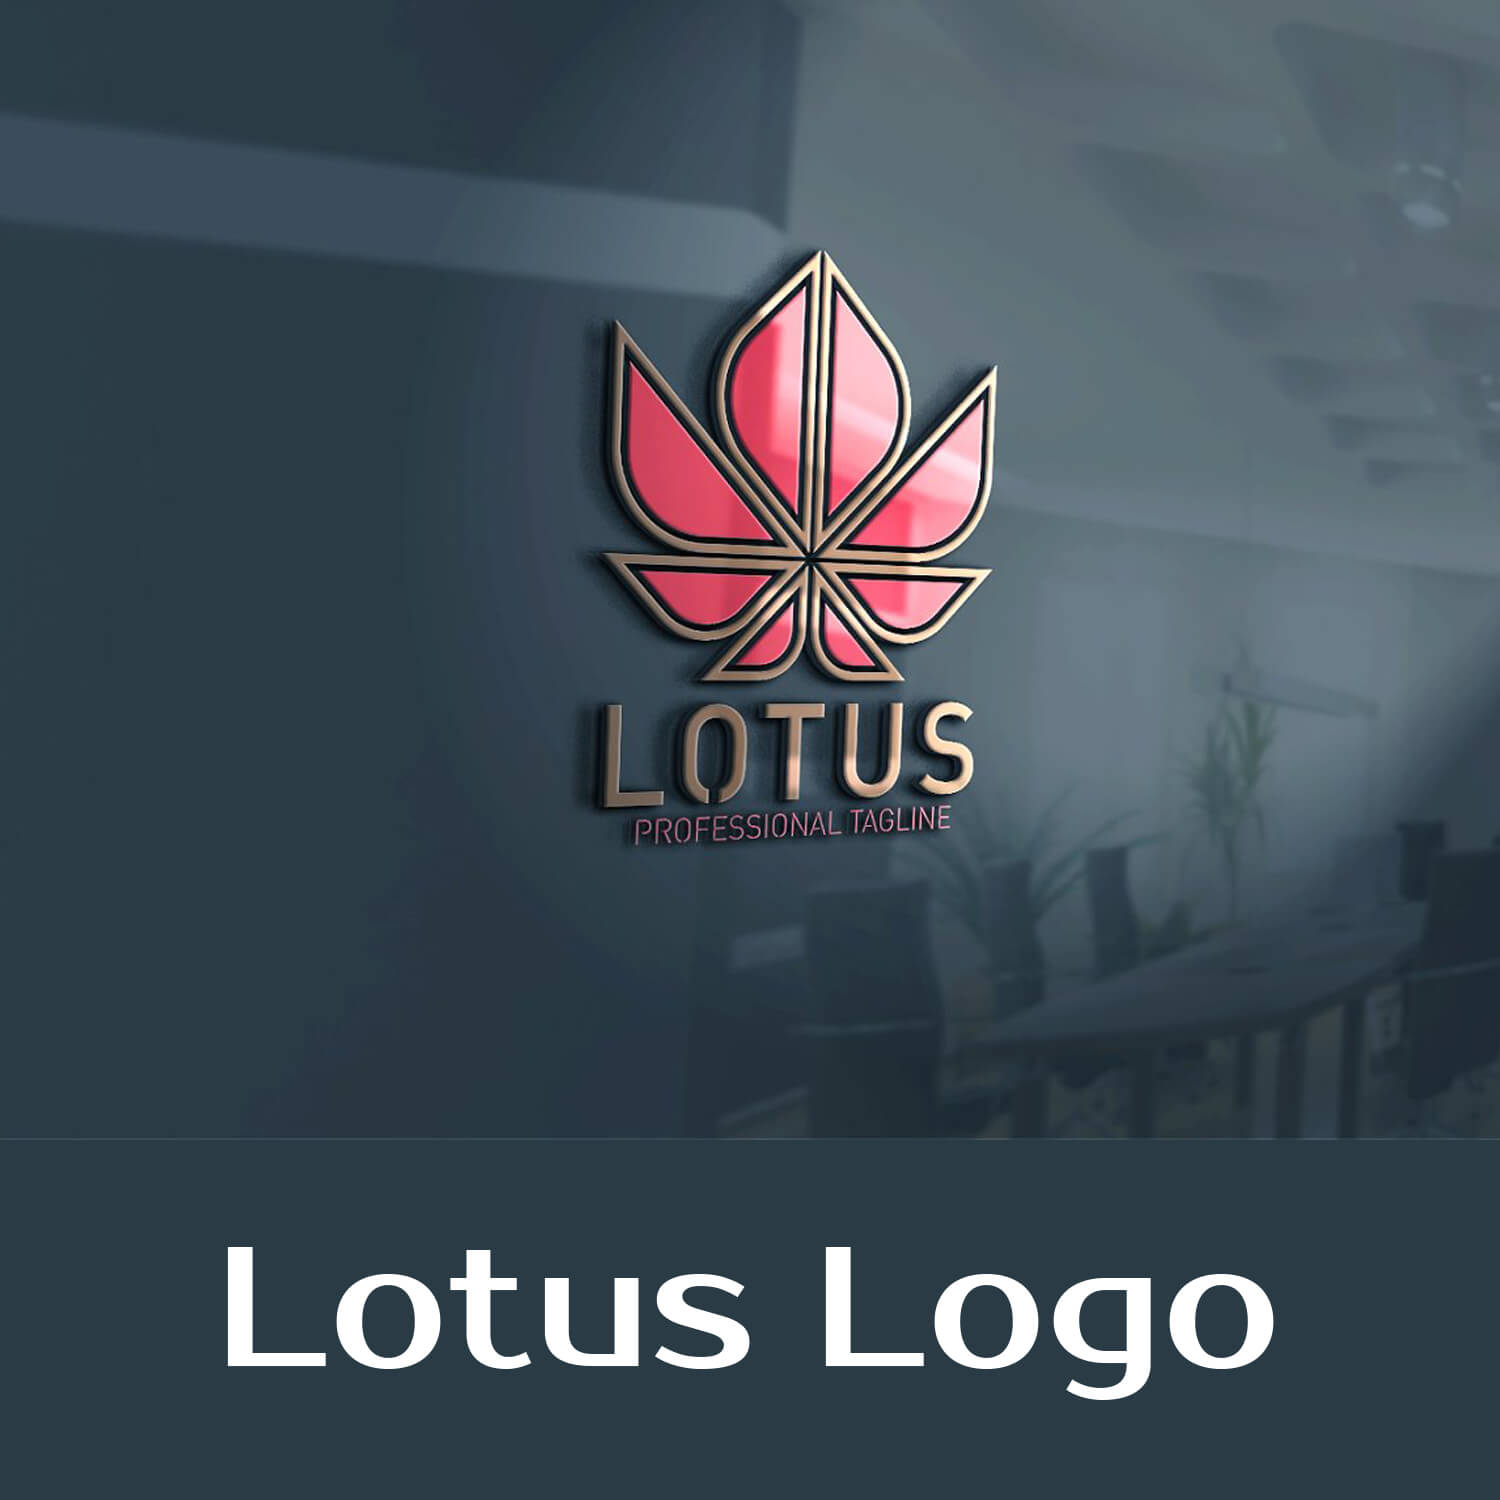 A professional image of a lotus logo on a beautiful glossy background.